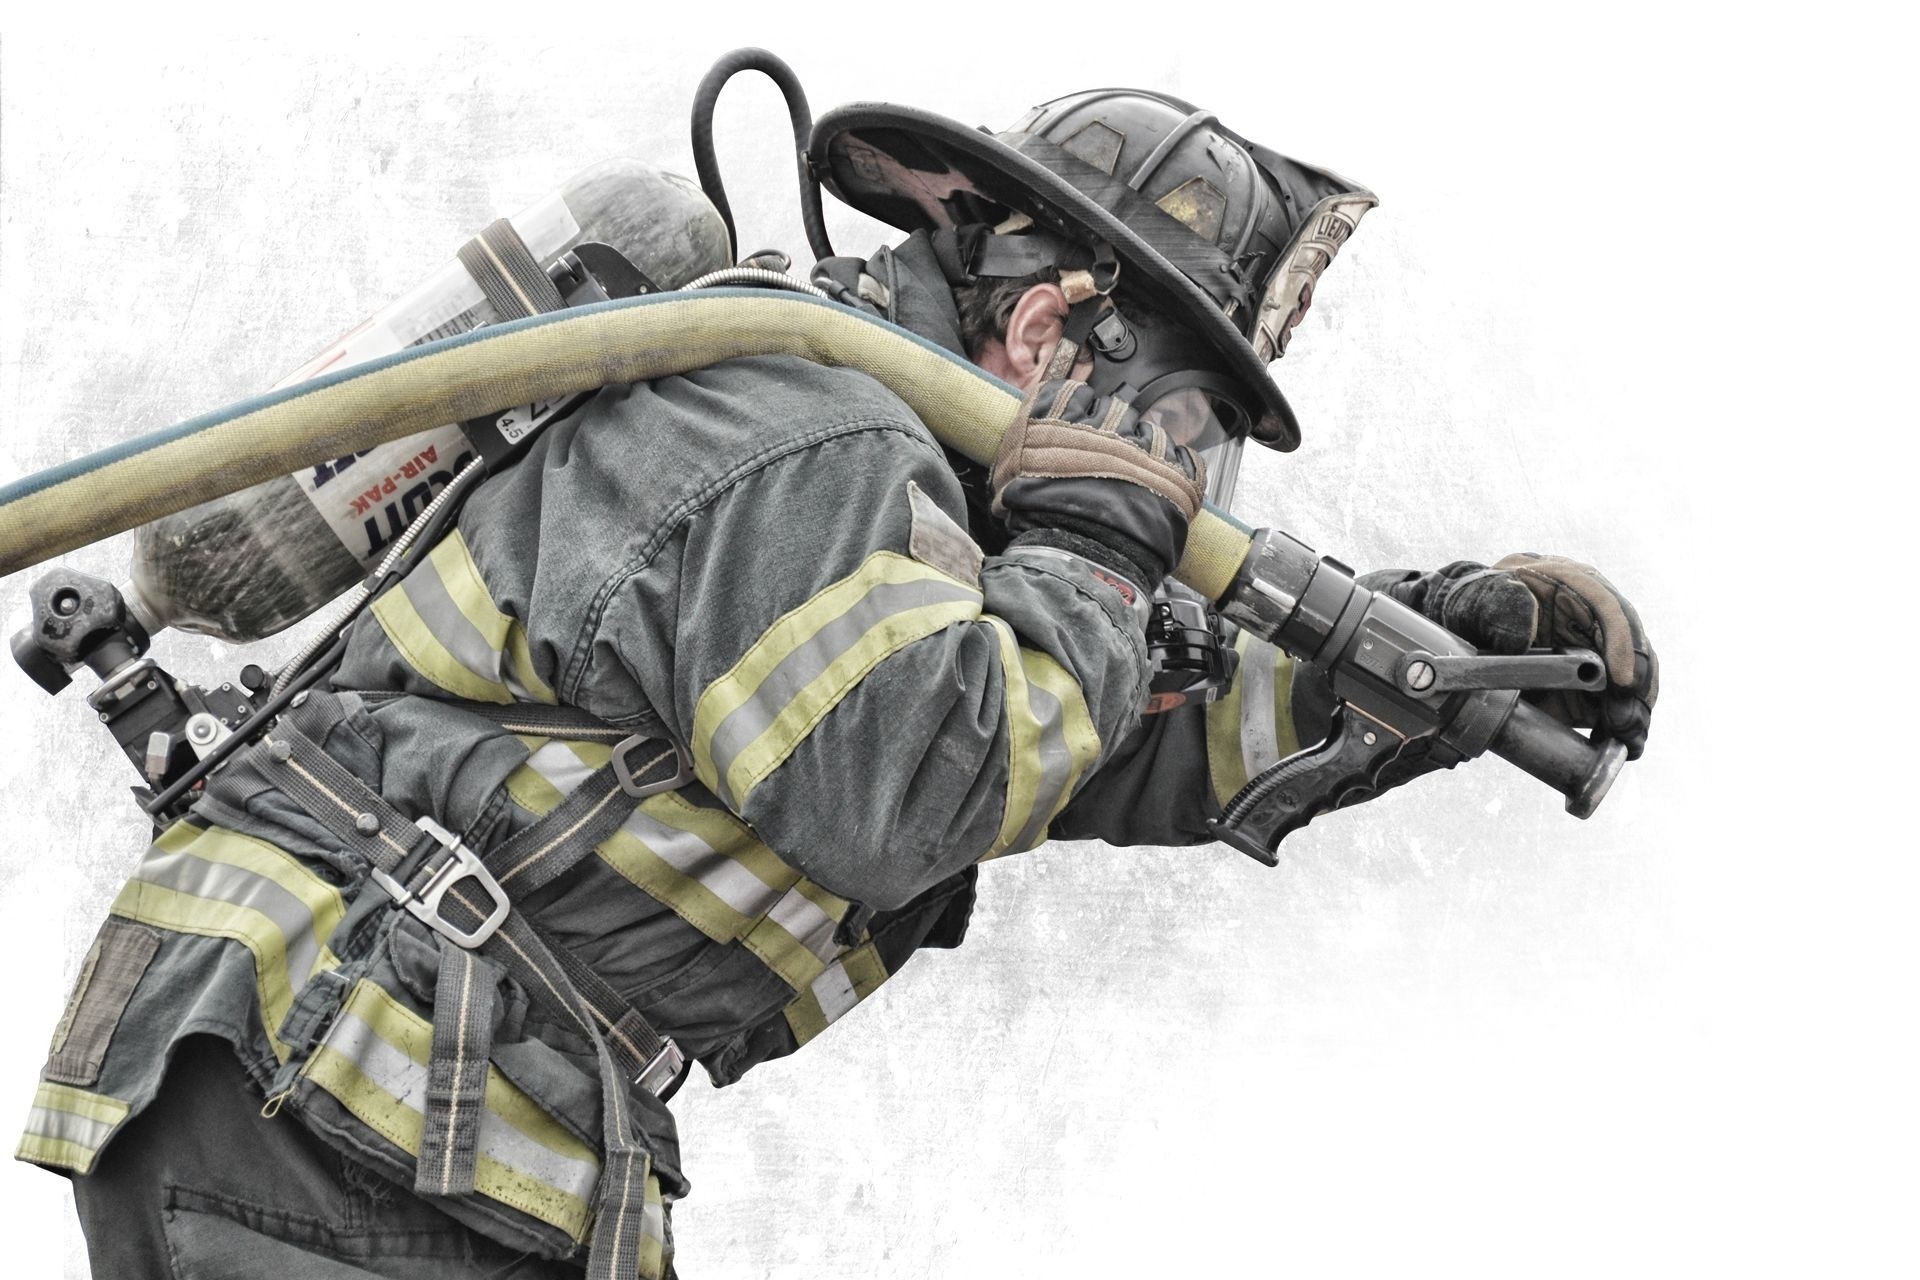 1920x1280 Title : free firefighter wallpaper for phone 1920Ã1280 firefighting.  Dimension : 1920 x 1280. File Type : JPG/JPEG